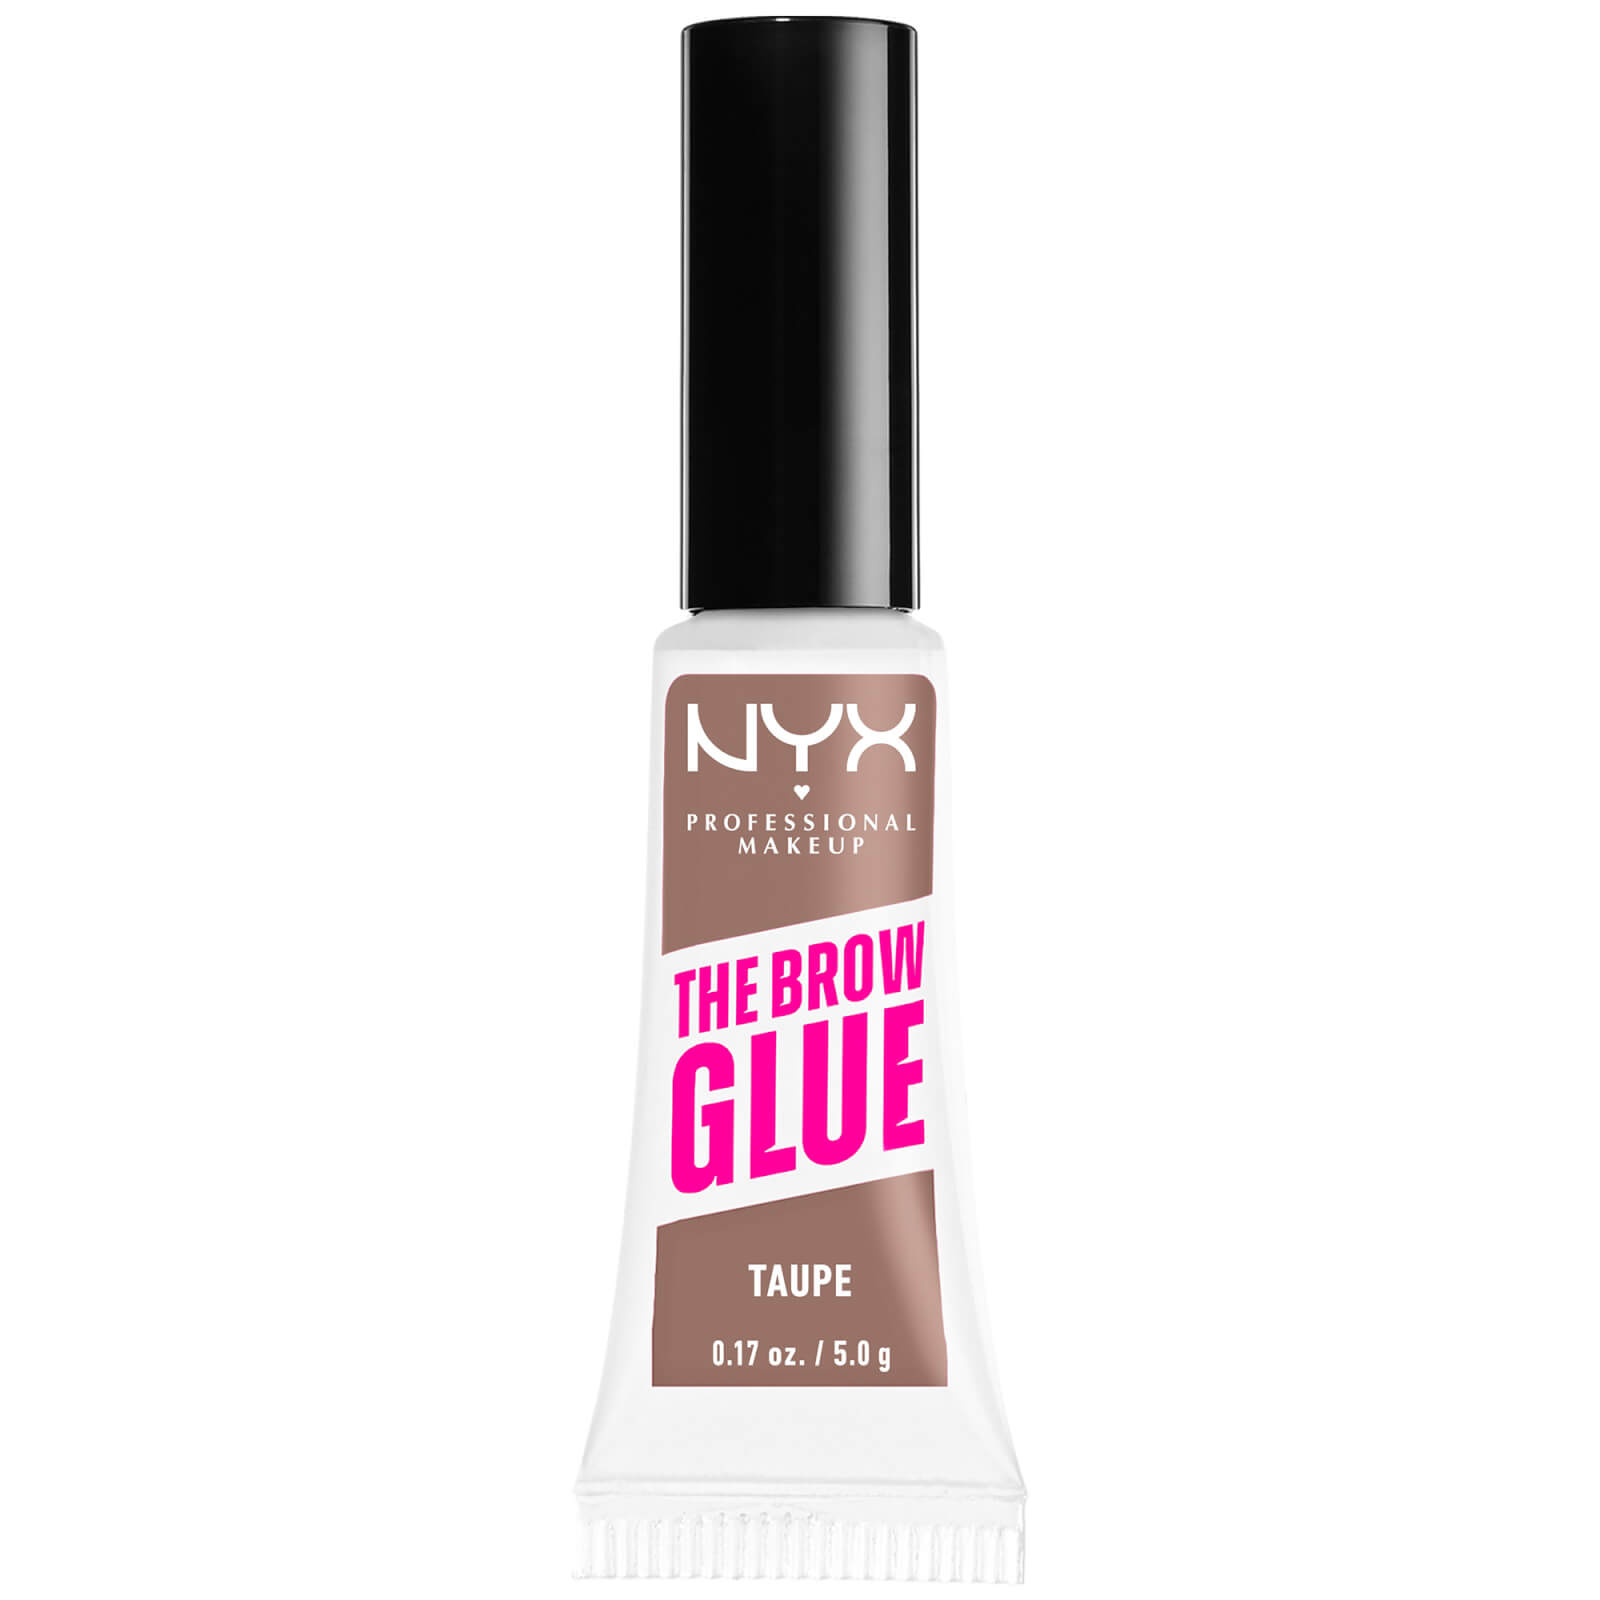 NYX Professional Makeup The Brow Glue Instant Styler 5g (Various Shades) - Taupe von NYX Professional Makeup